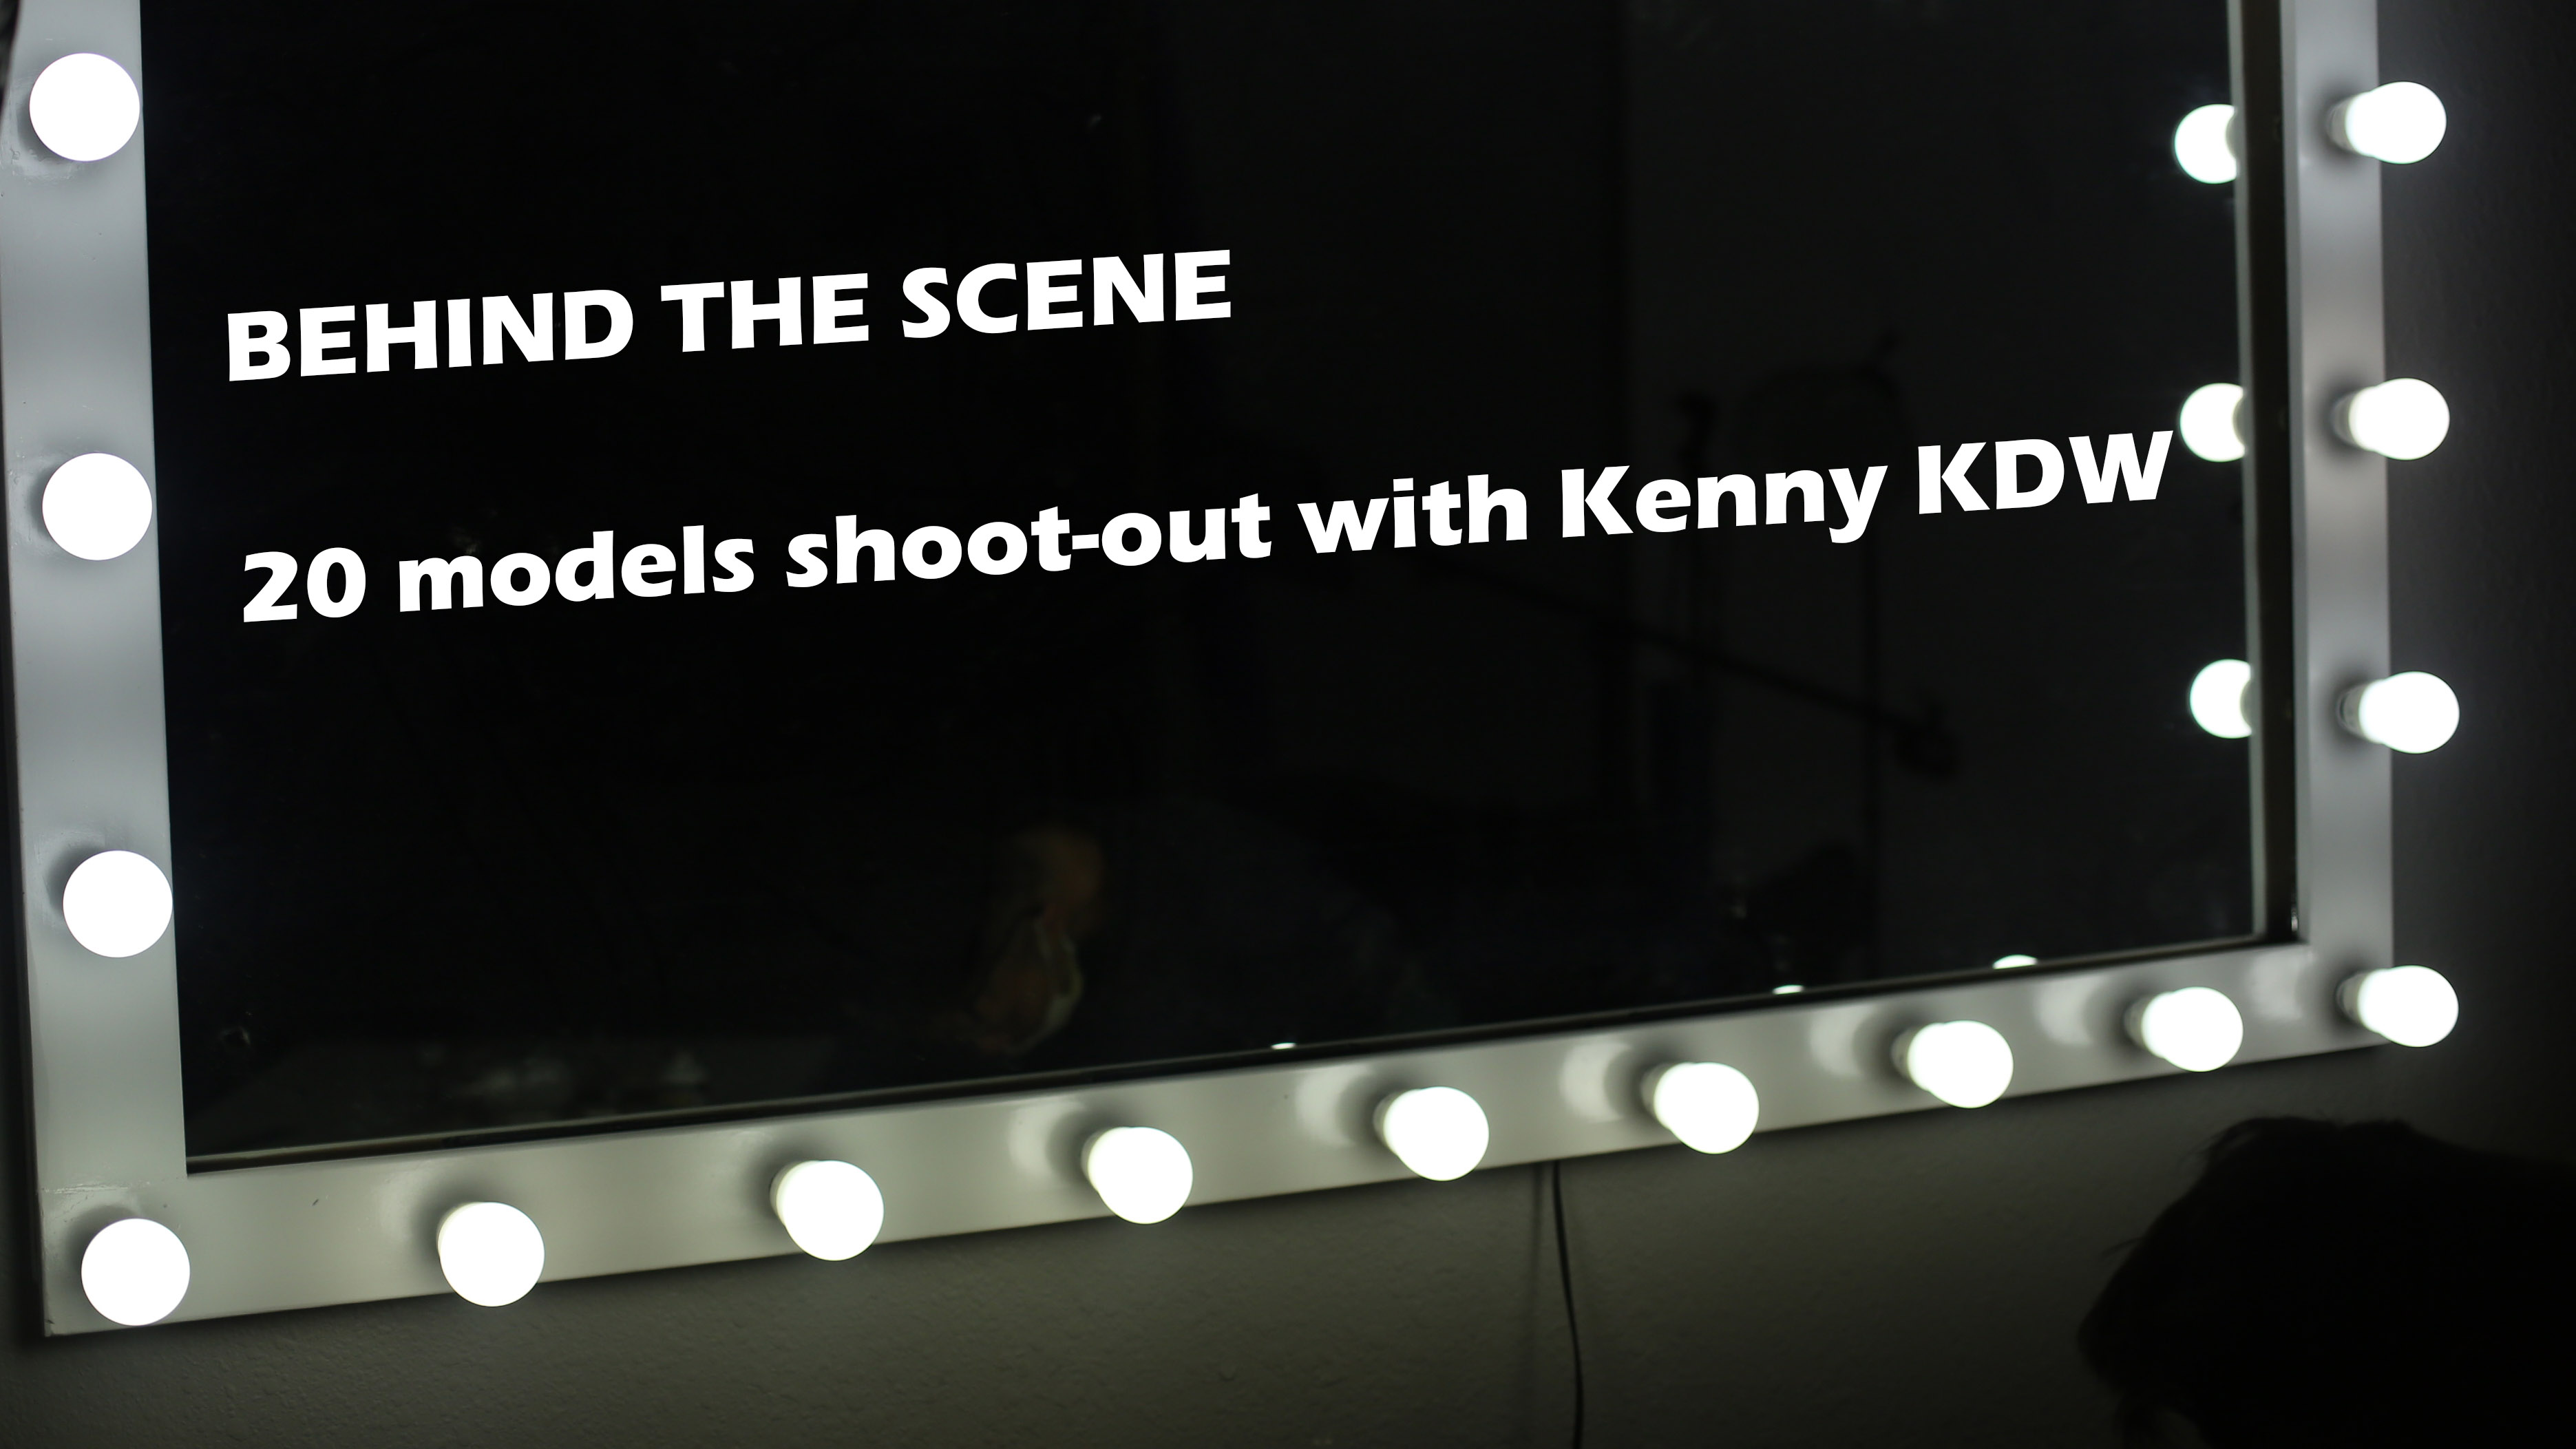 20+ models shoot out with Kenny KDW